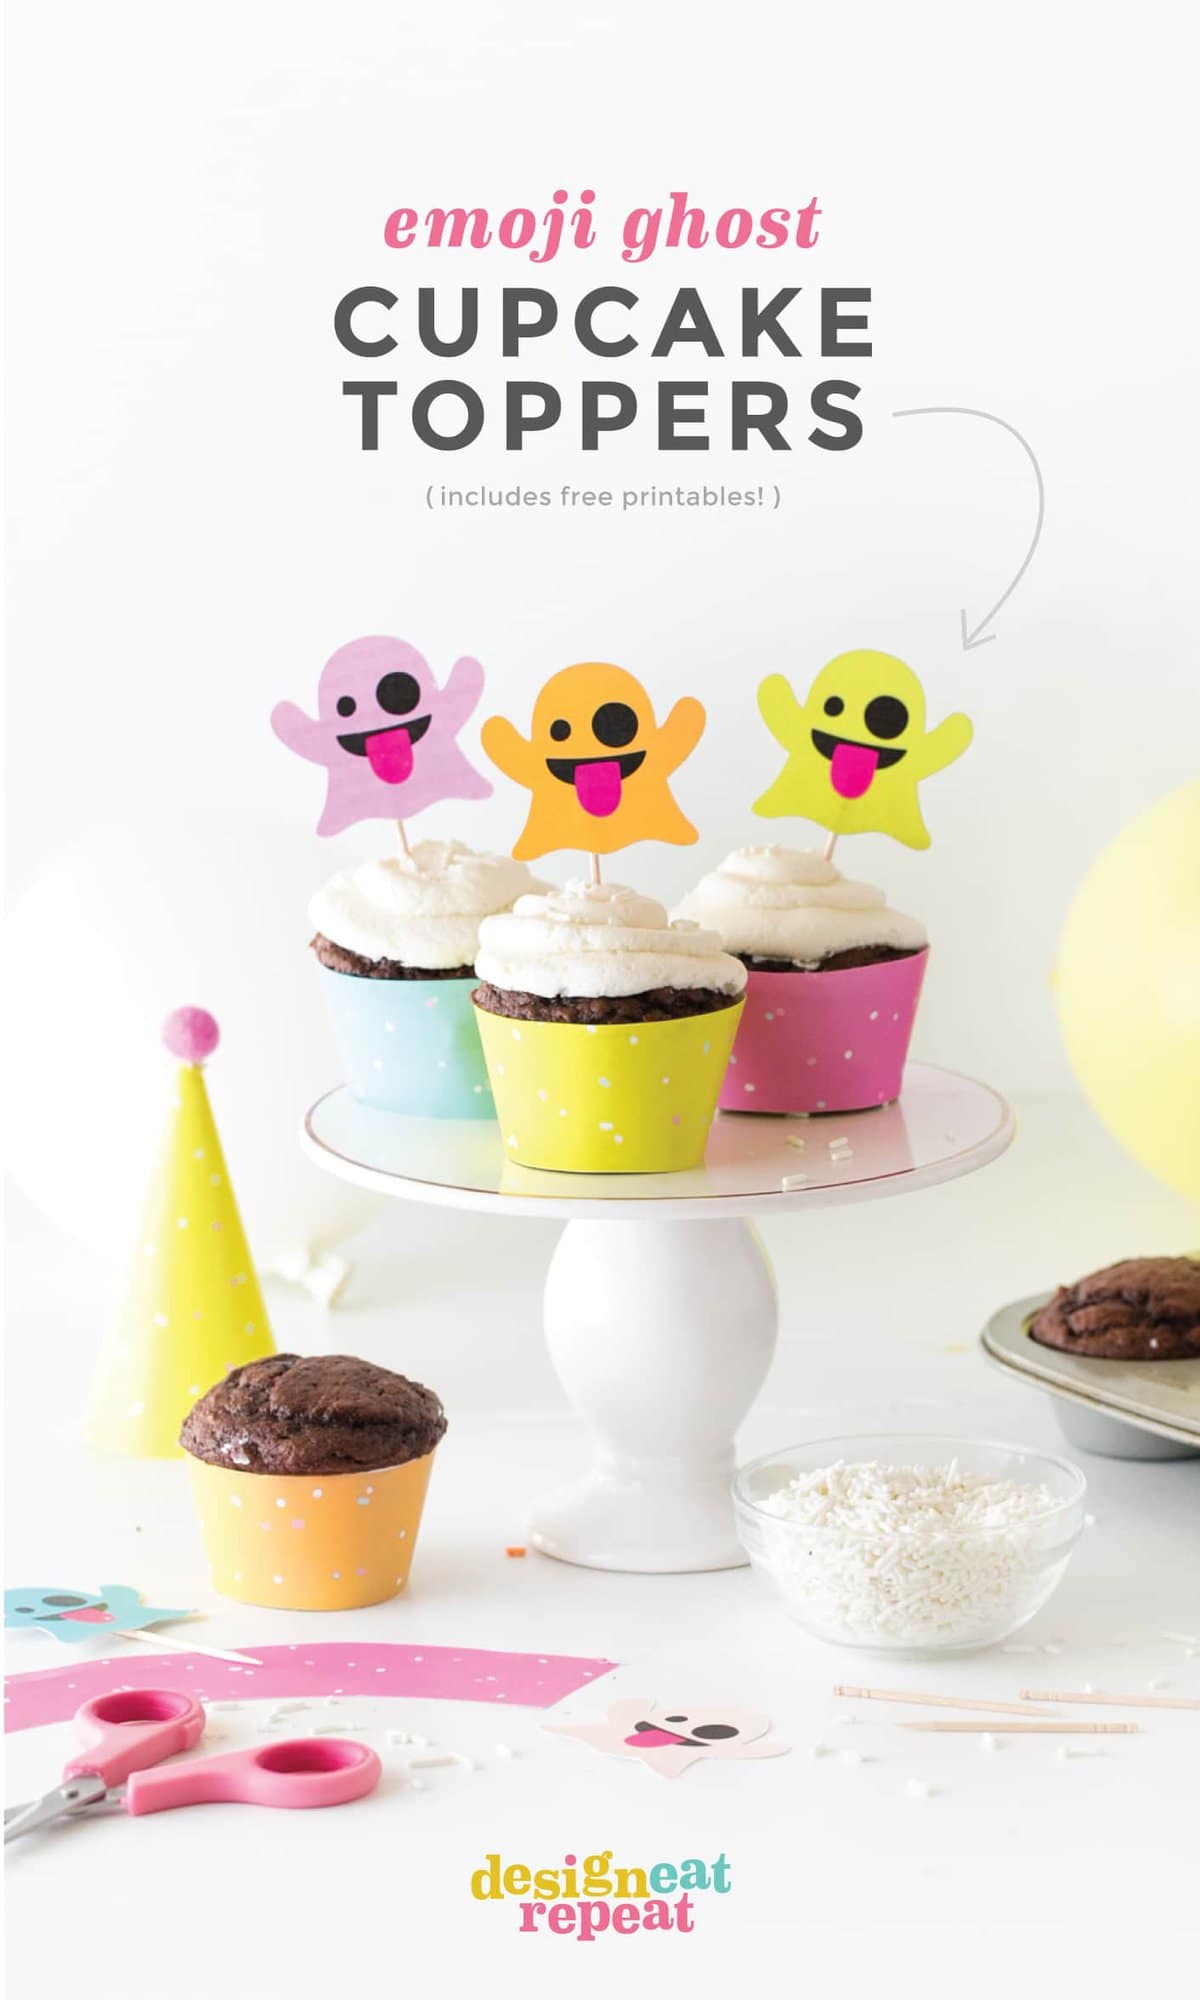 Emoji Ghost Halloween Cupcake Toppers! Free to download and print at www.DesignEatRepeat.com #Halloween #Printable #Cupcake #Emoji